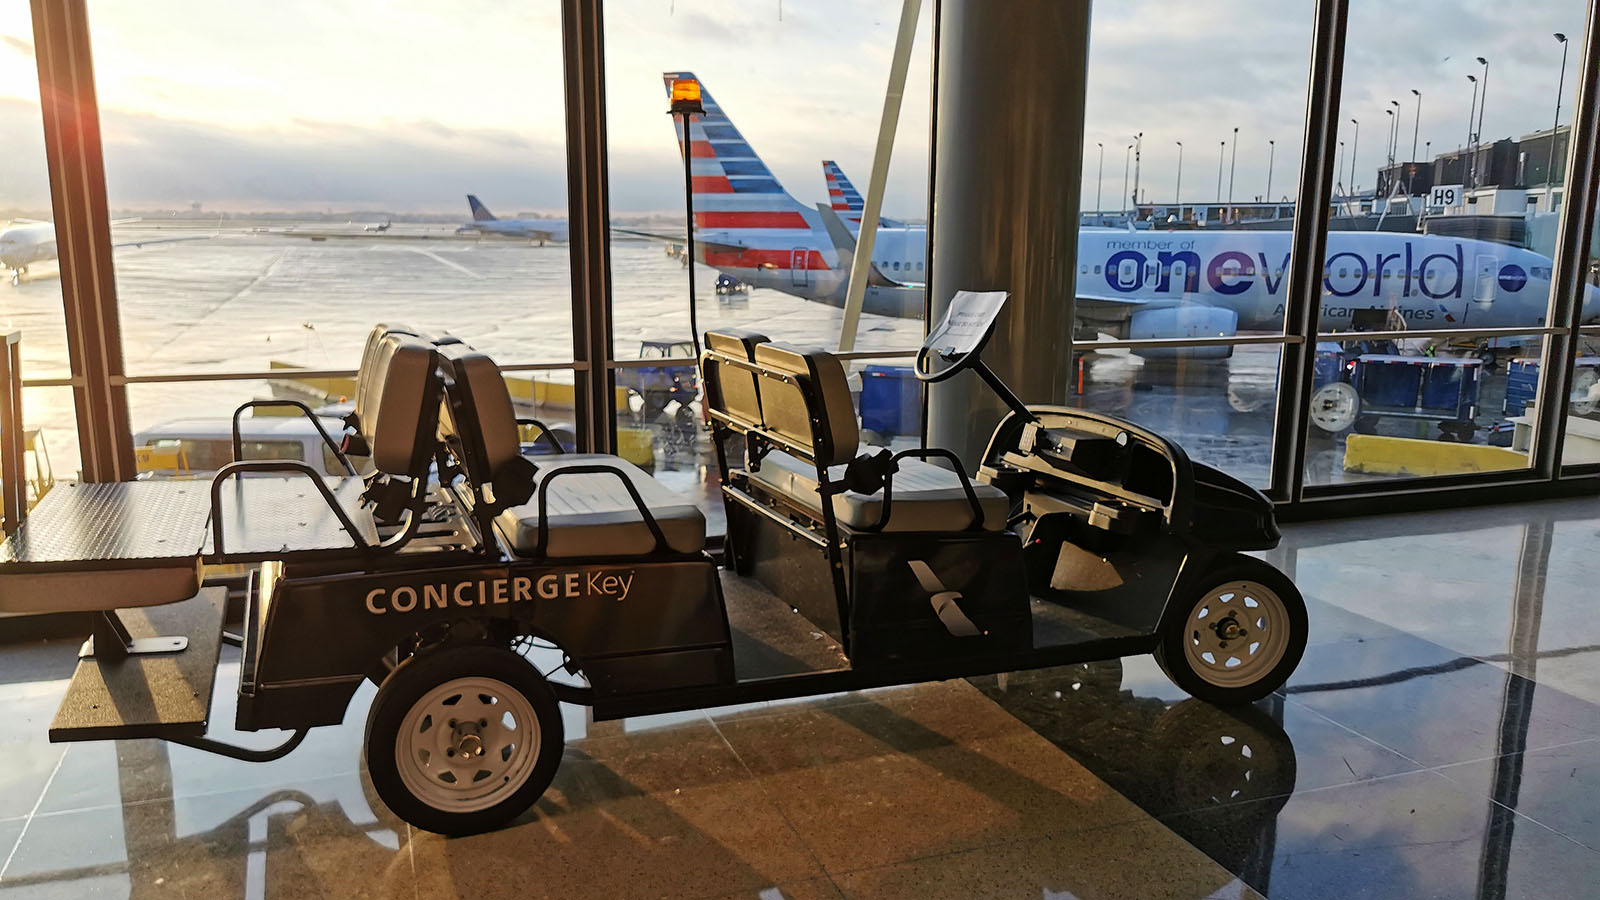 American Airlines ConciergeKey airport buggy